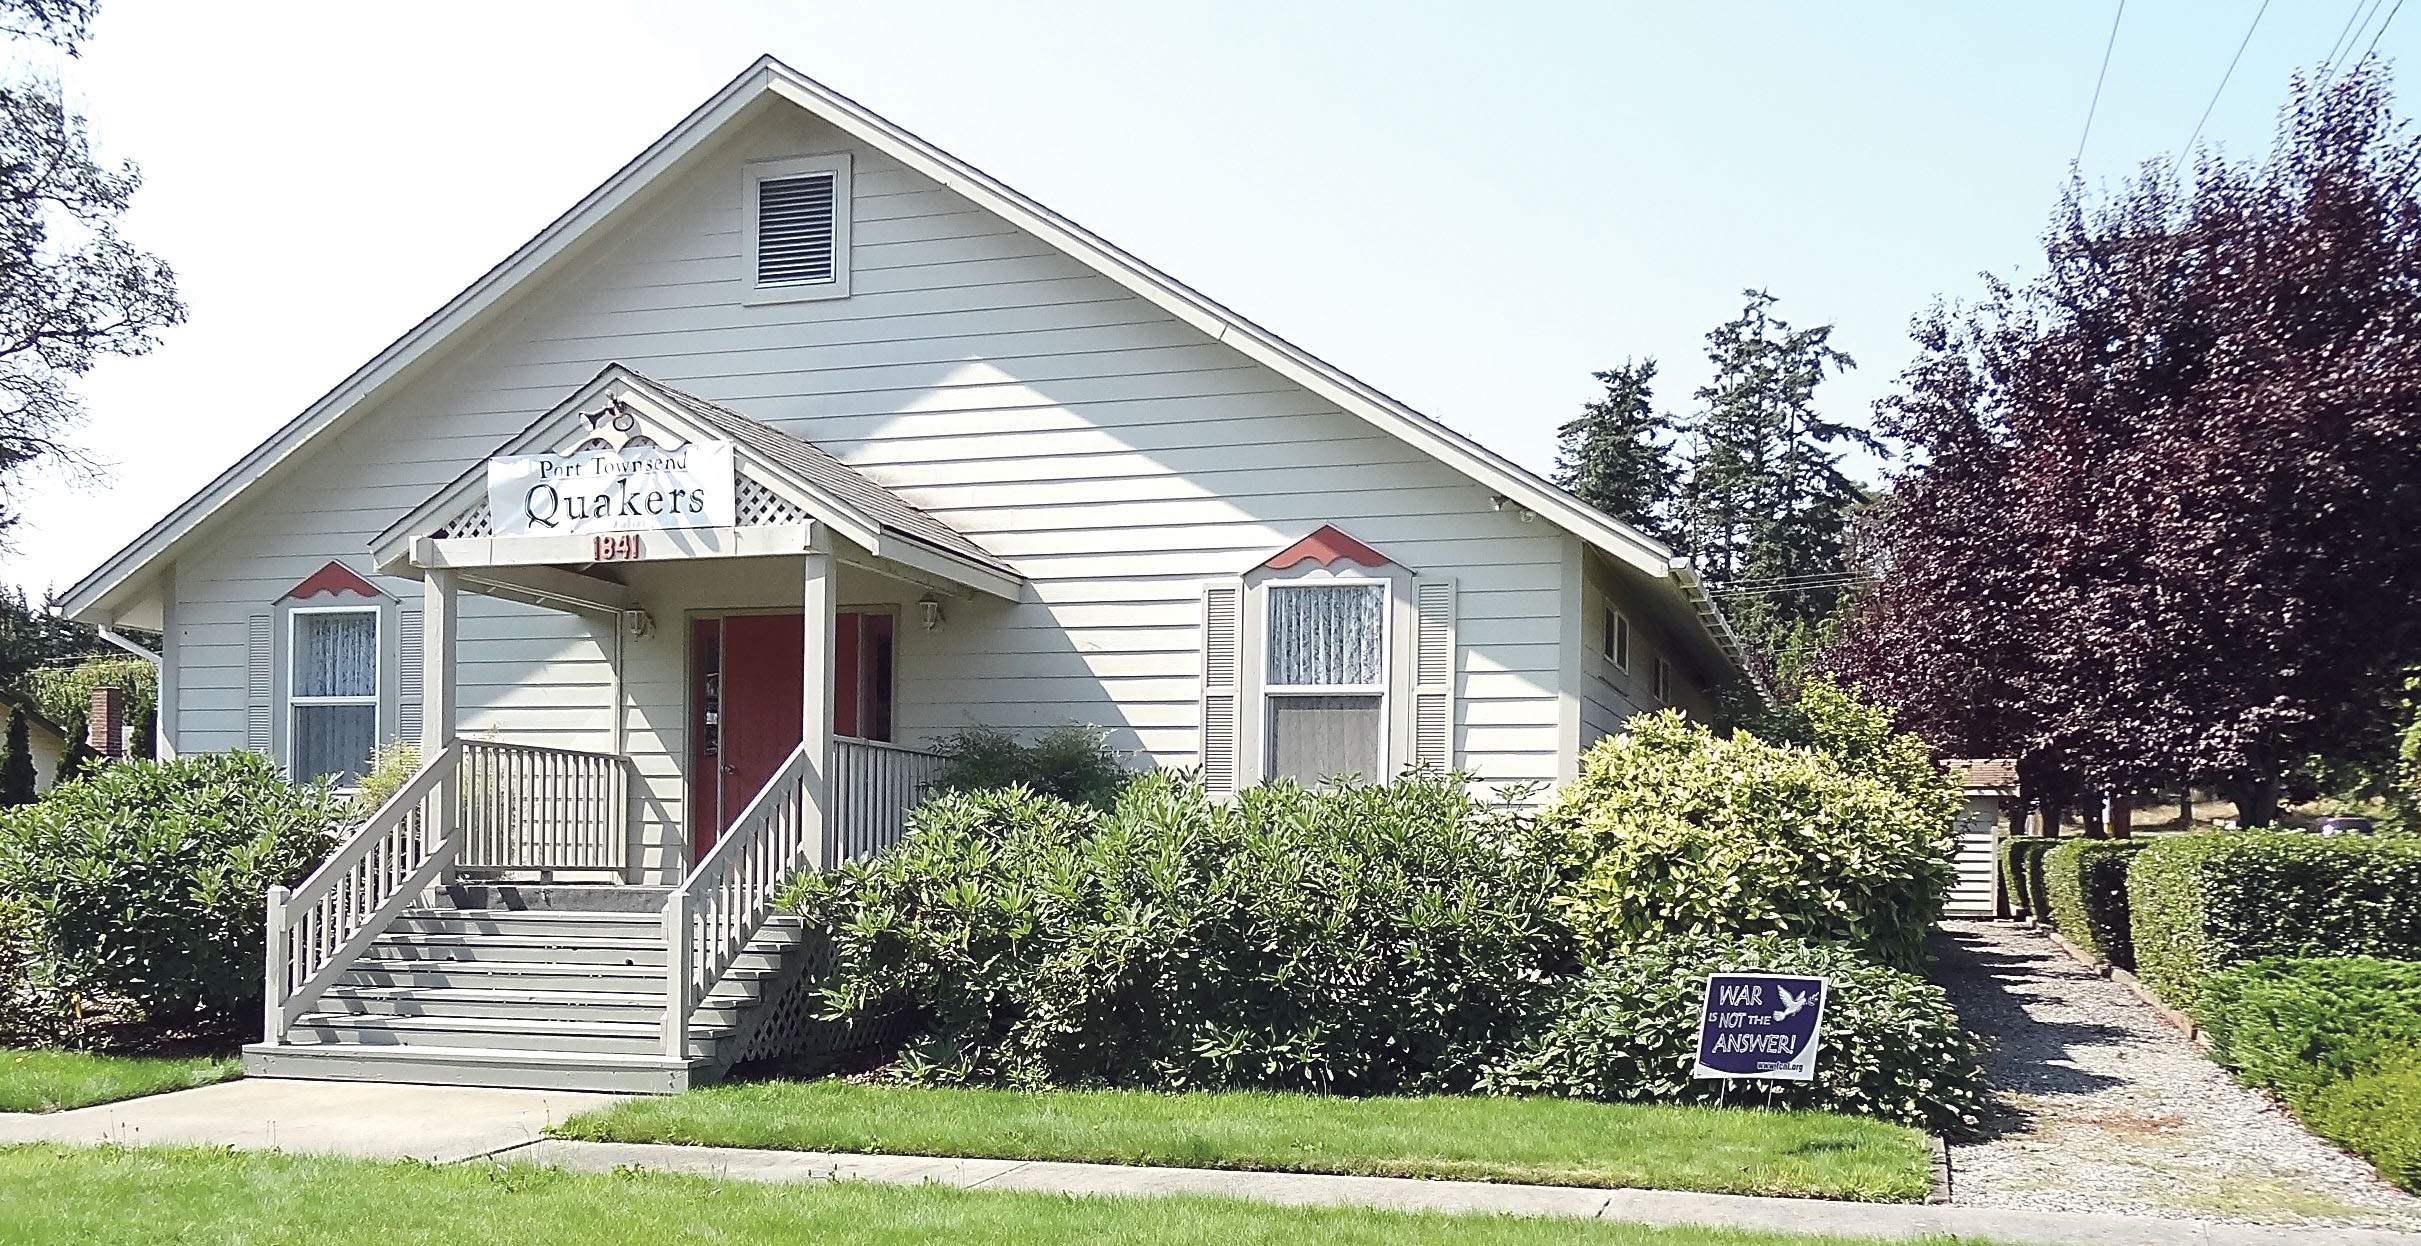 Port Townsend Friends Meeting has a new home at 1841 Sheridan St. — Port Townsend Friends Meeting